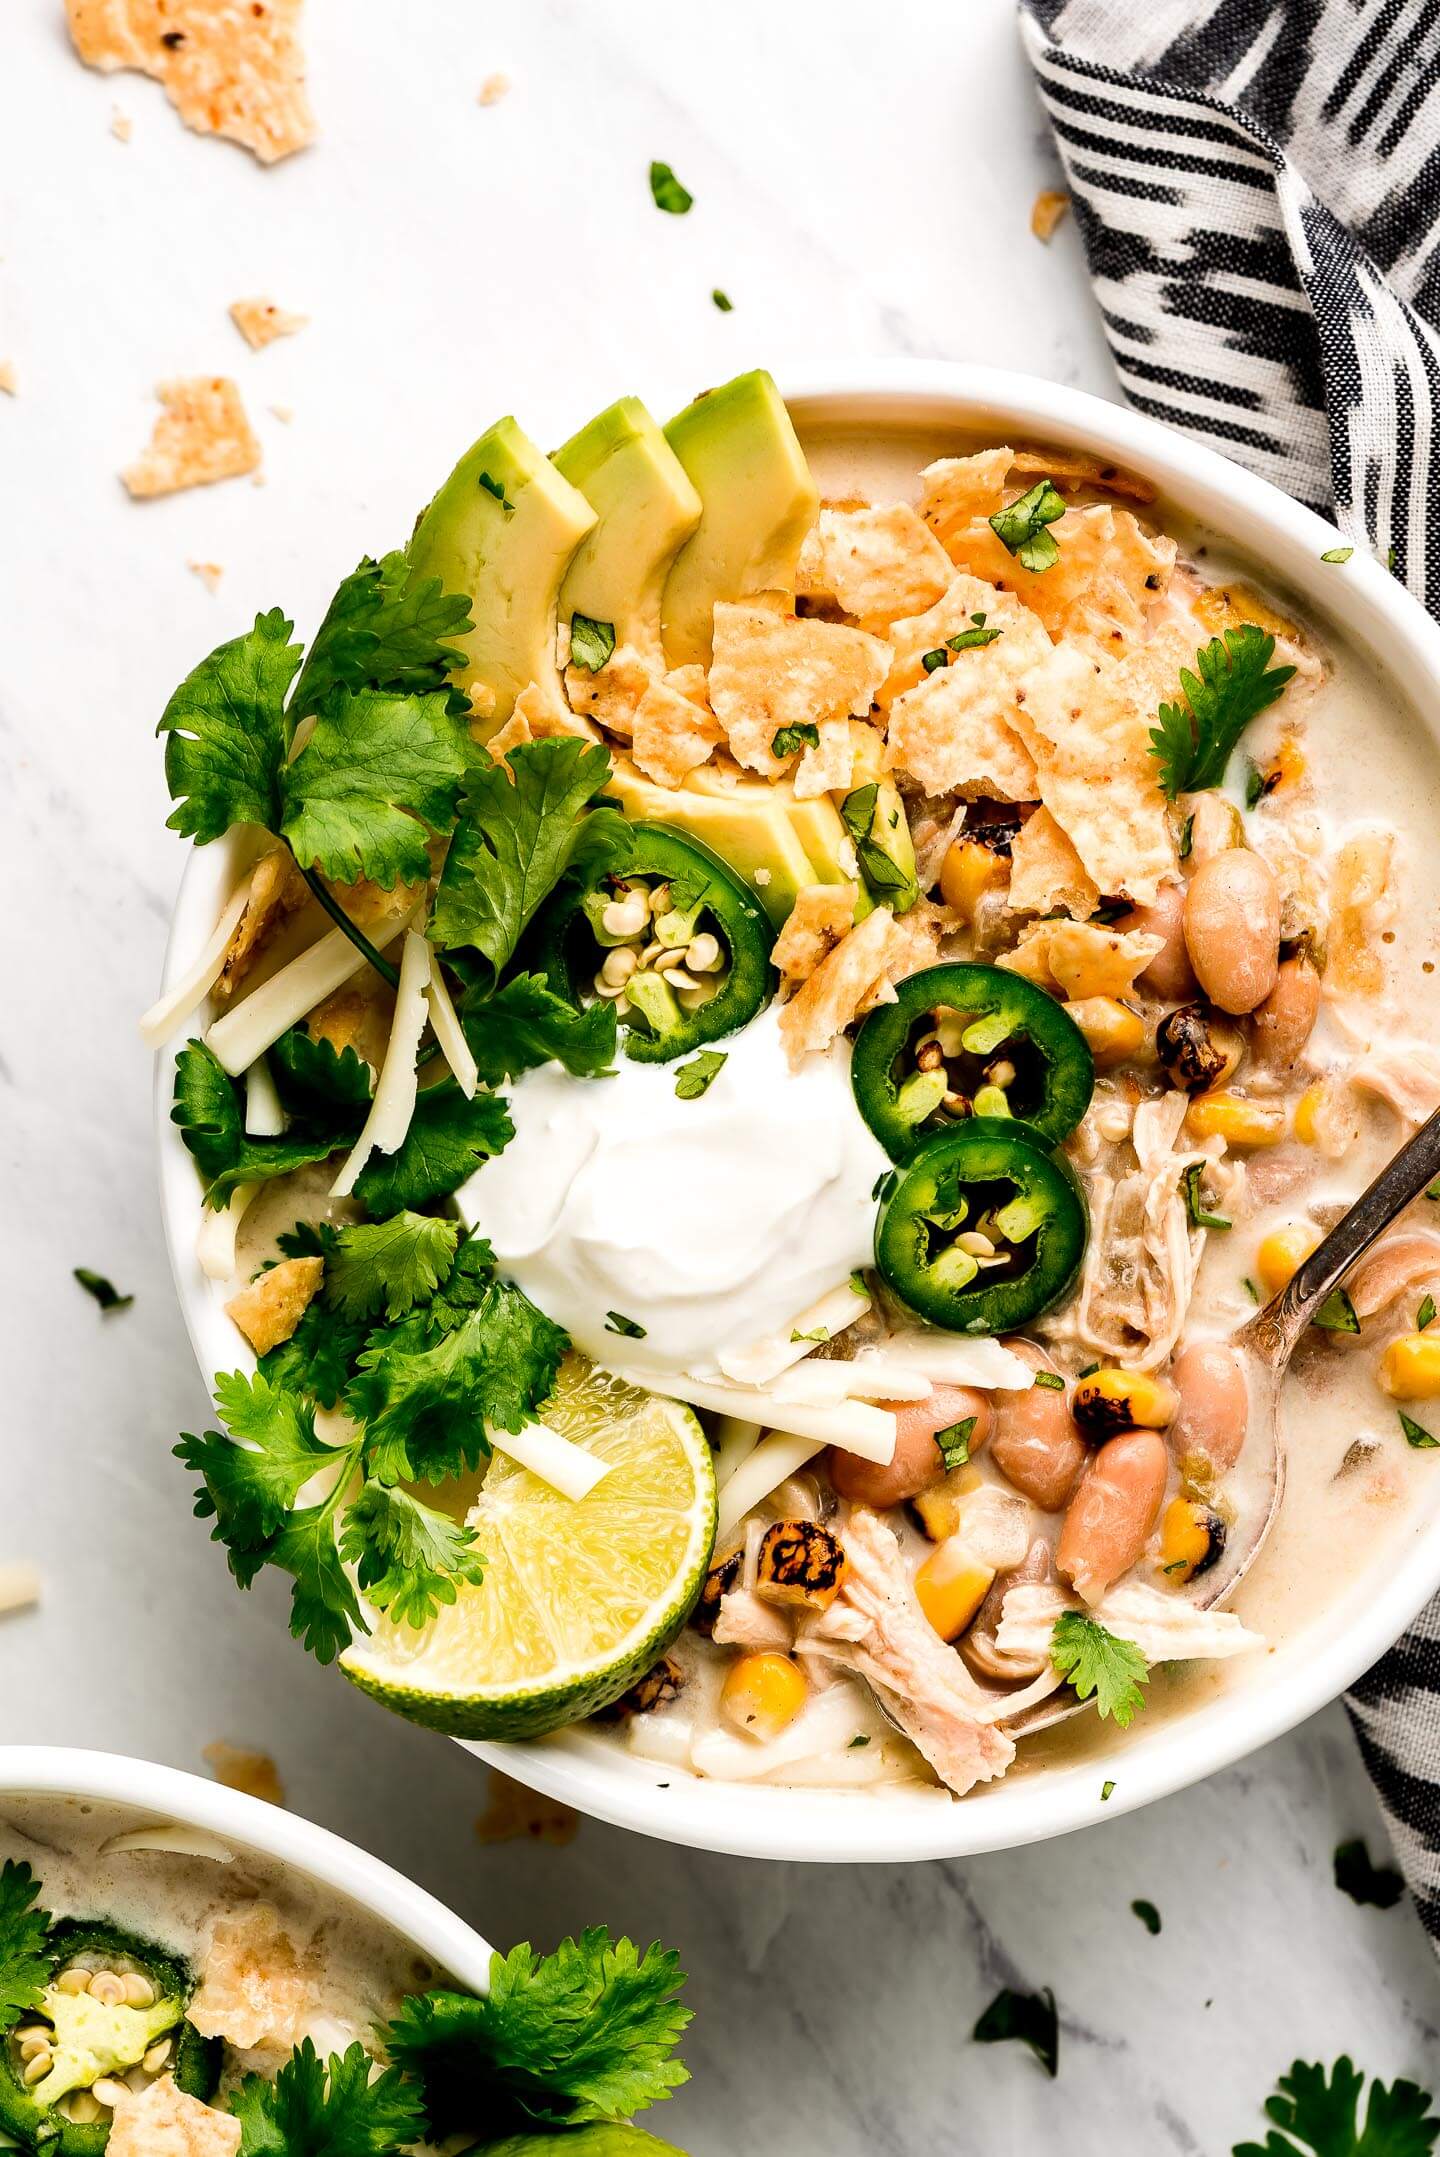 White Chicken Chili in a bowl topped with avocado slices, cilantro, jalapeno, chips, cheese, sour cream, and a lime.